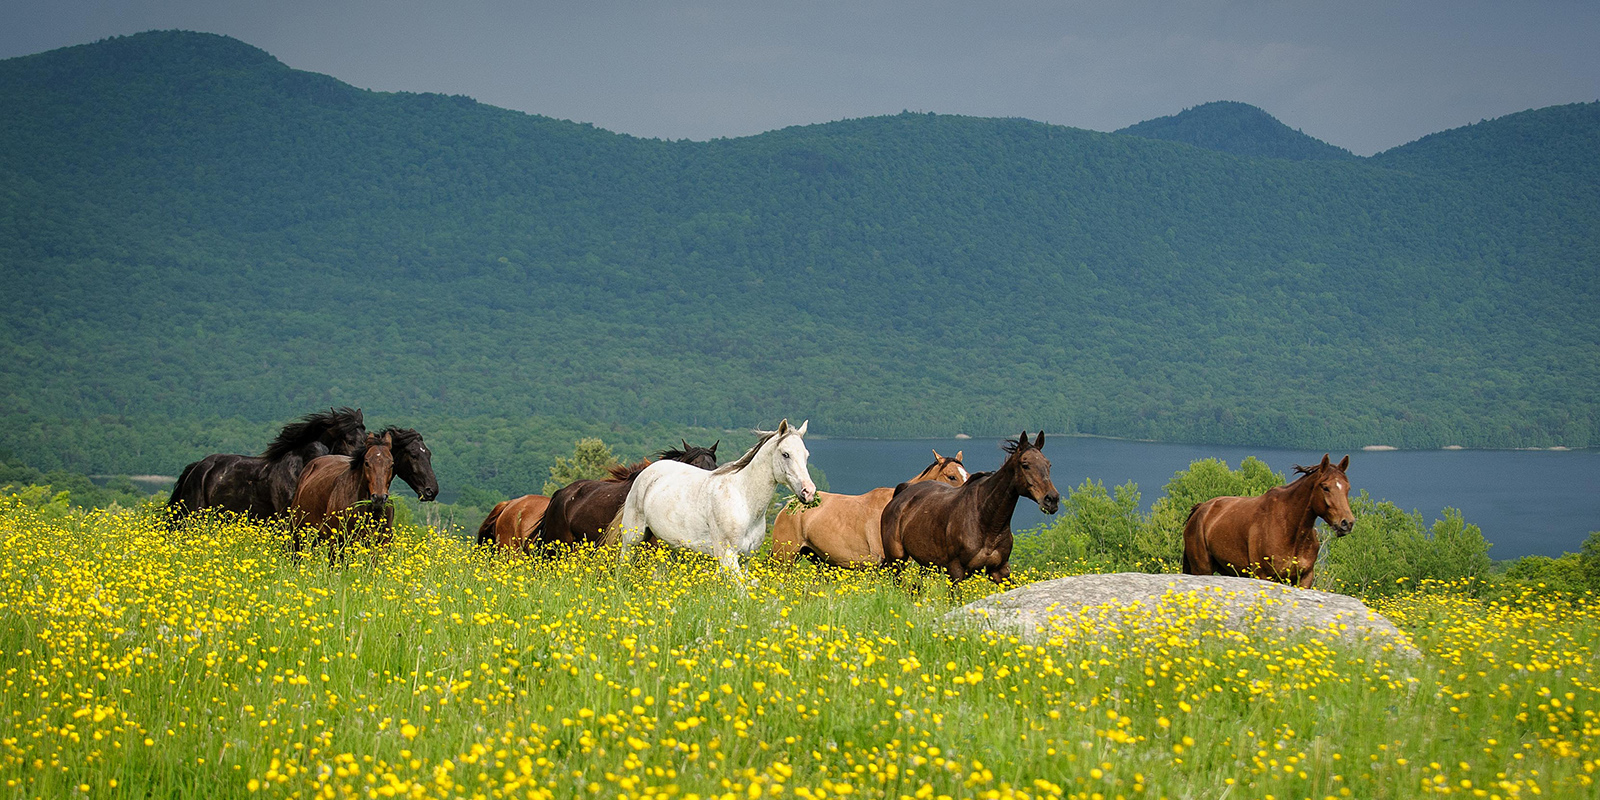 group of brown and black horses and 1 white horse running through meadow of yellow flowers with mountains in background